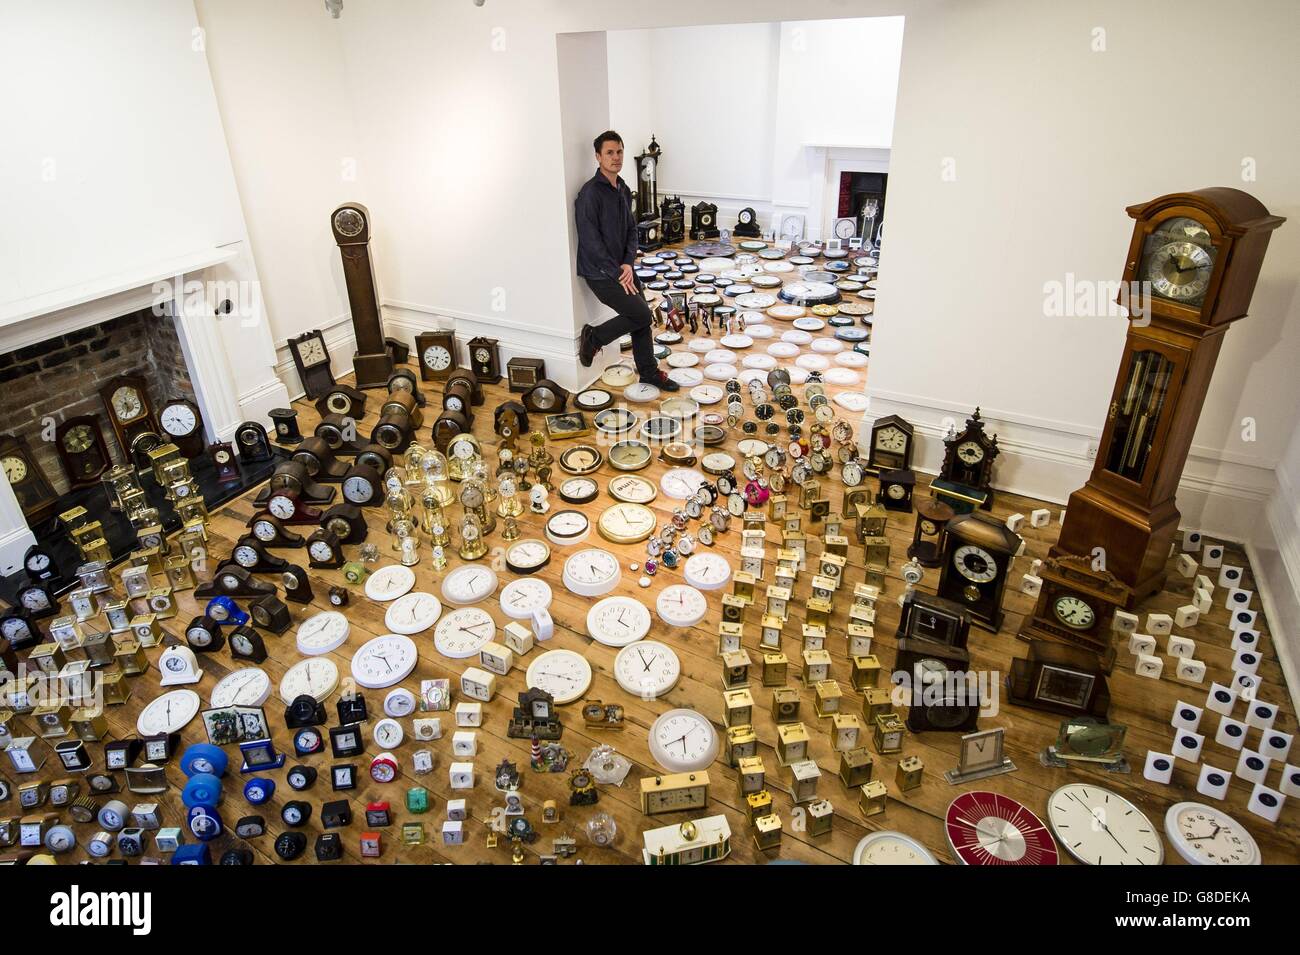 Luke Jerram with his art installation titled 'Harrison's Garden' featuring 1000 clocks in a room at the Thelma Hulbert Gallery in Honiton, Devon. Stock Photo